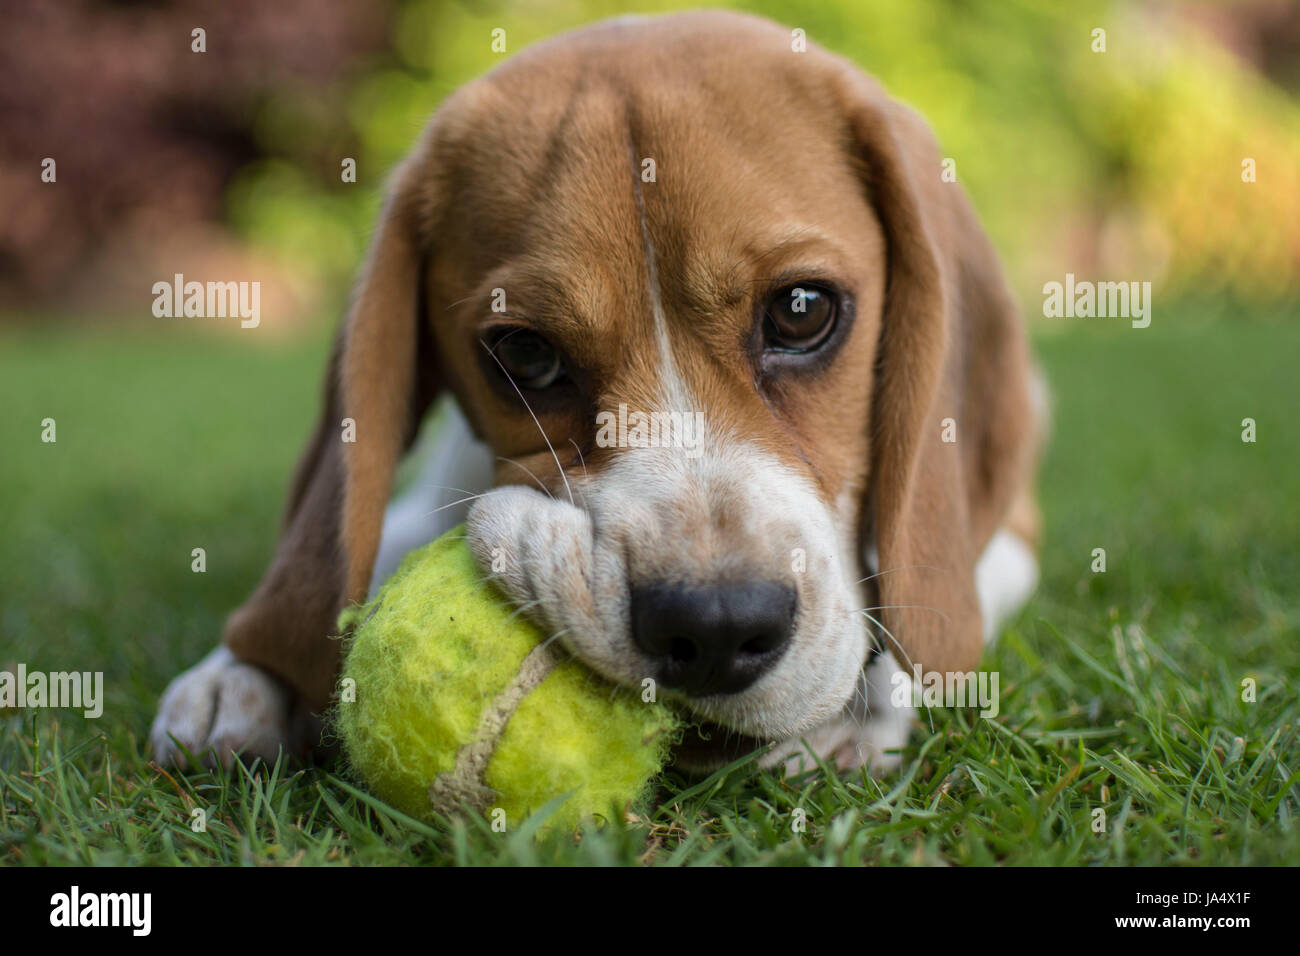 A female Beagle puppy playing and chewing with a yellow tennis ball on grass Stock Photo